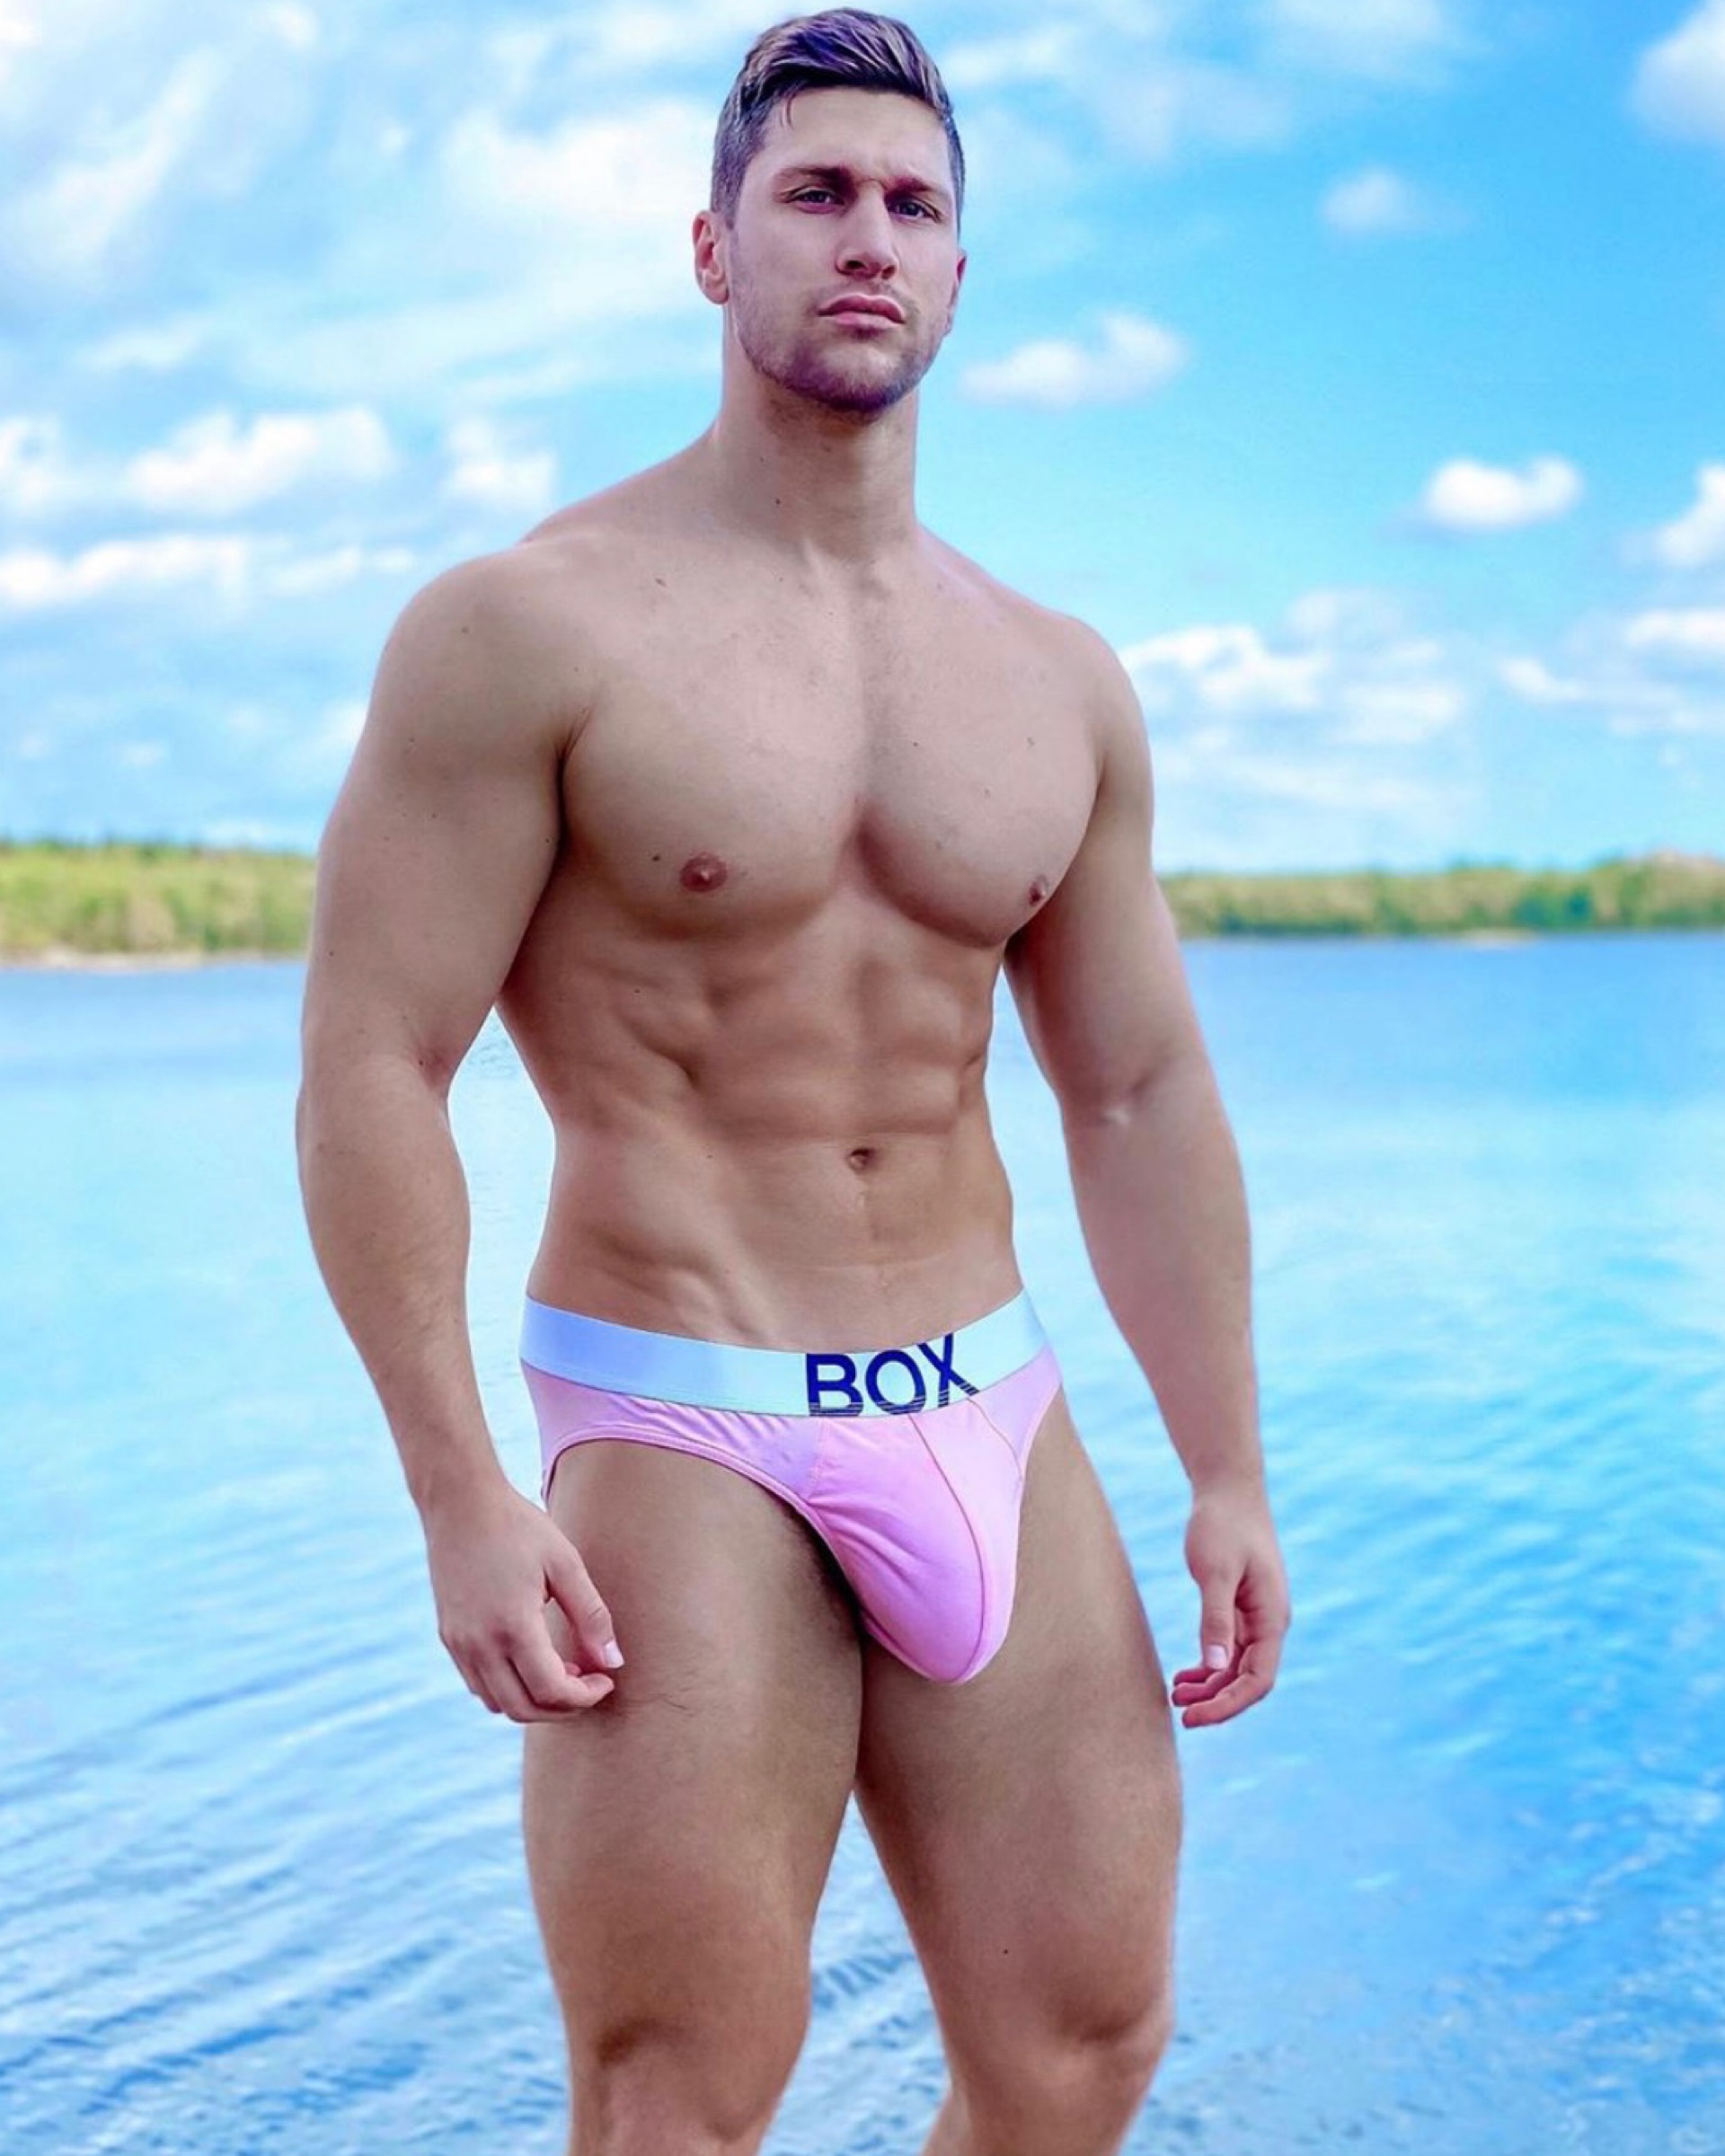 Kyle Hynick puts on an eye-popping display for Box underwear (PICS) -  Attitude